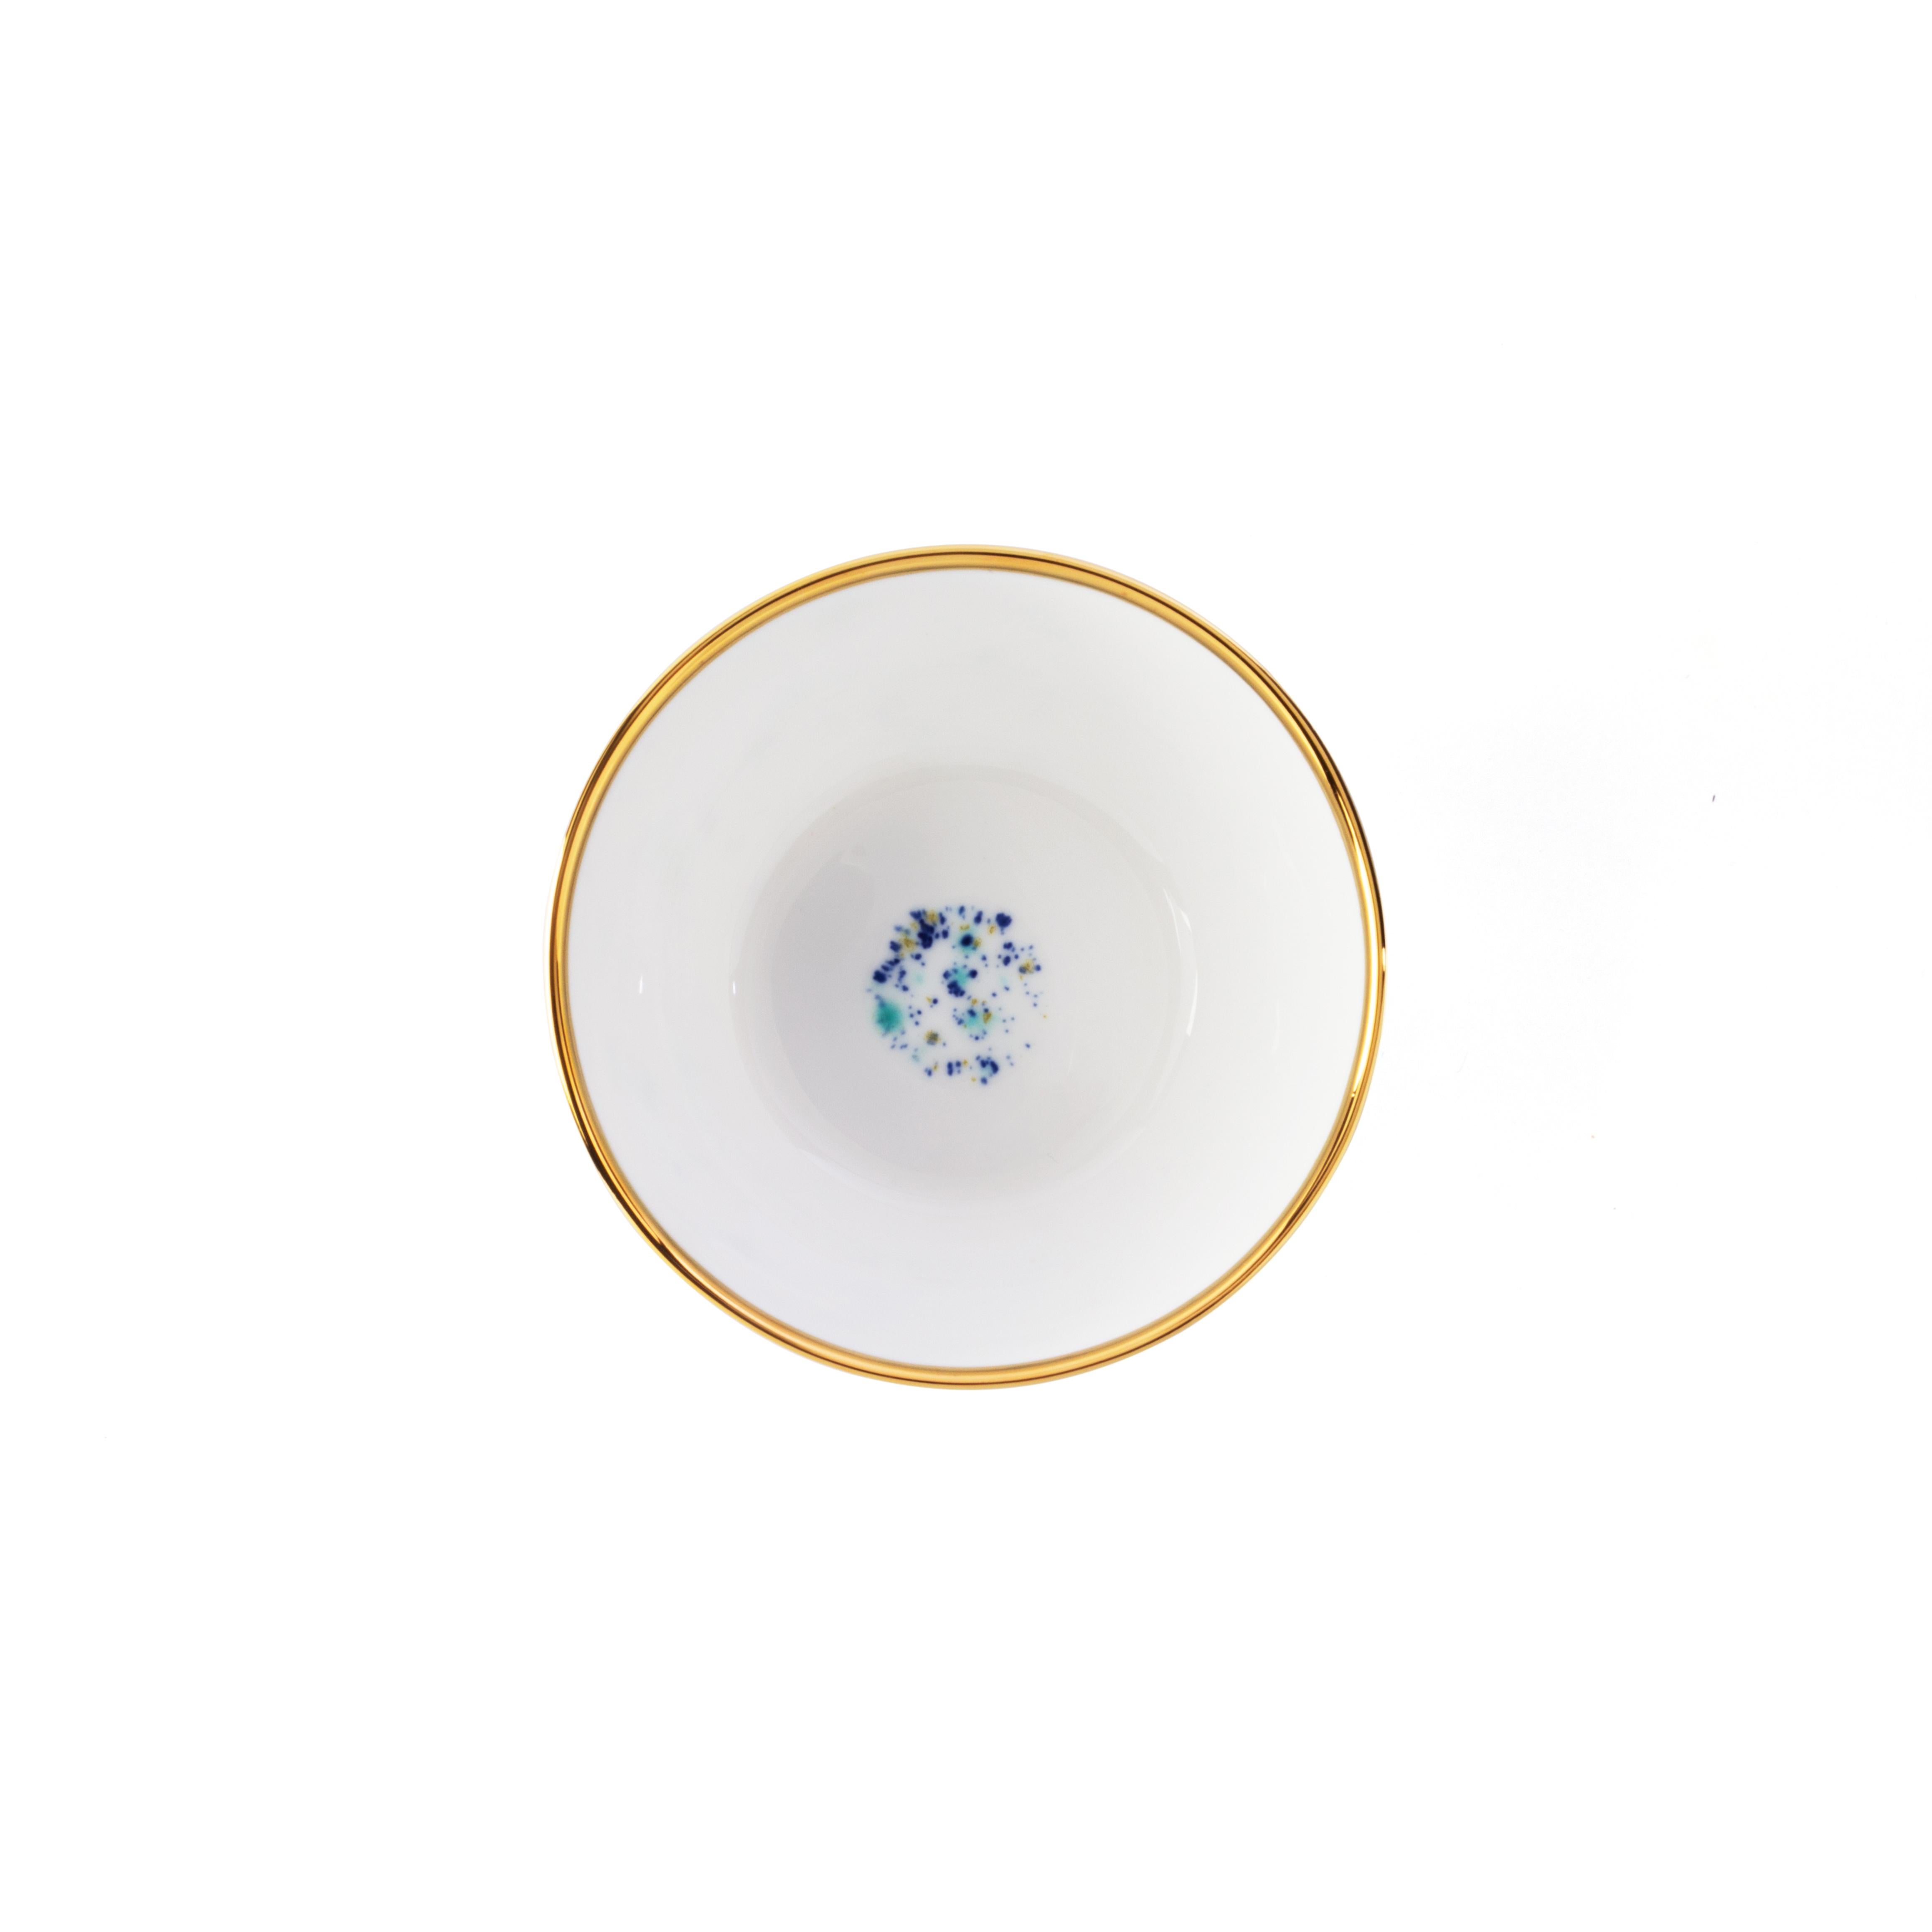 Handcrafted in Italy from the finest porcelain, this Blue Marble Fruit Bowl is decorated outside with a blue yellow and green décor crowned by an elegant golden rim; the inside is white with a dotted Blue Marble decor at the bottom.

Set of 2 fruit